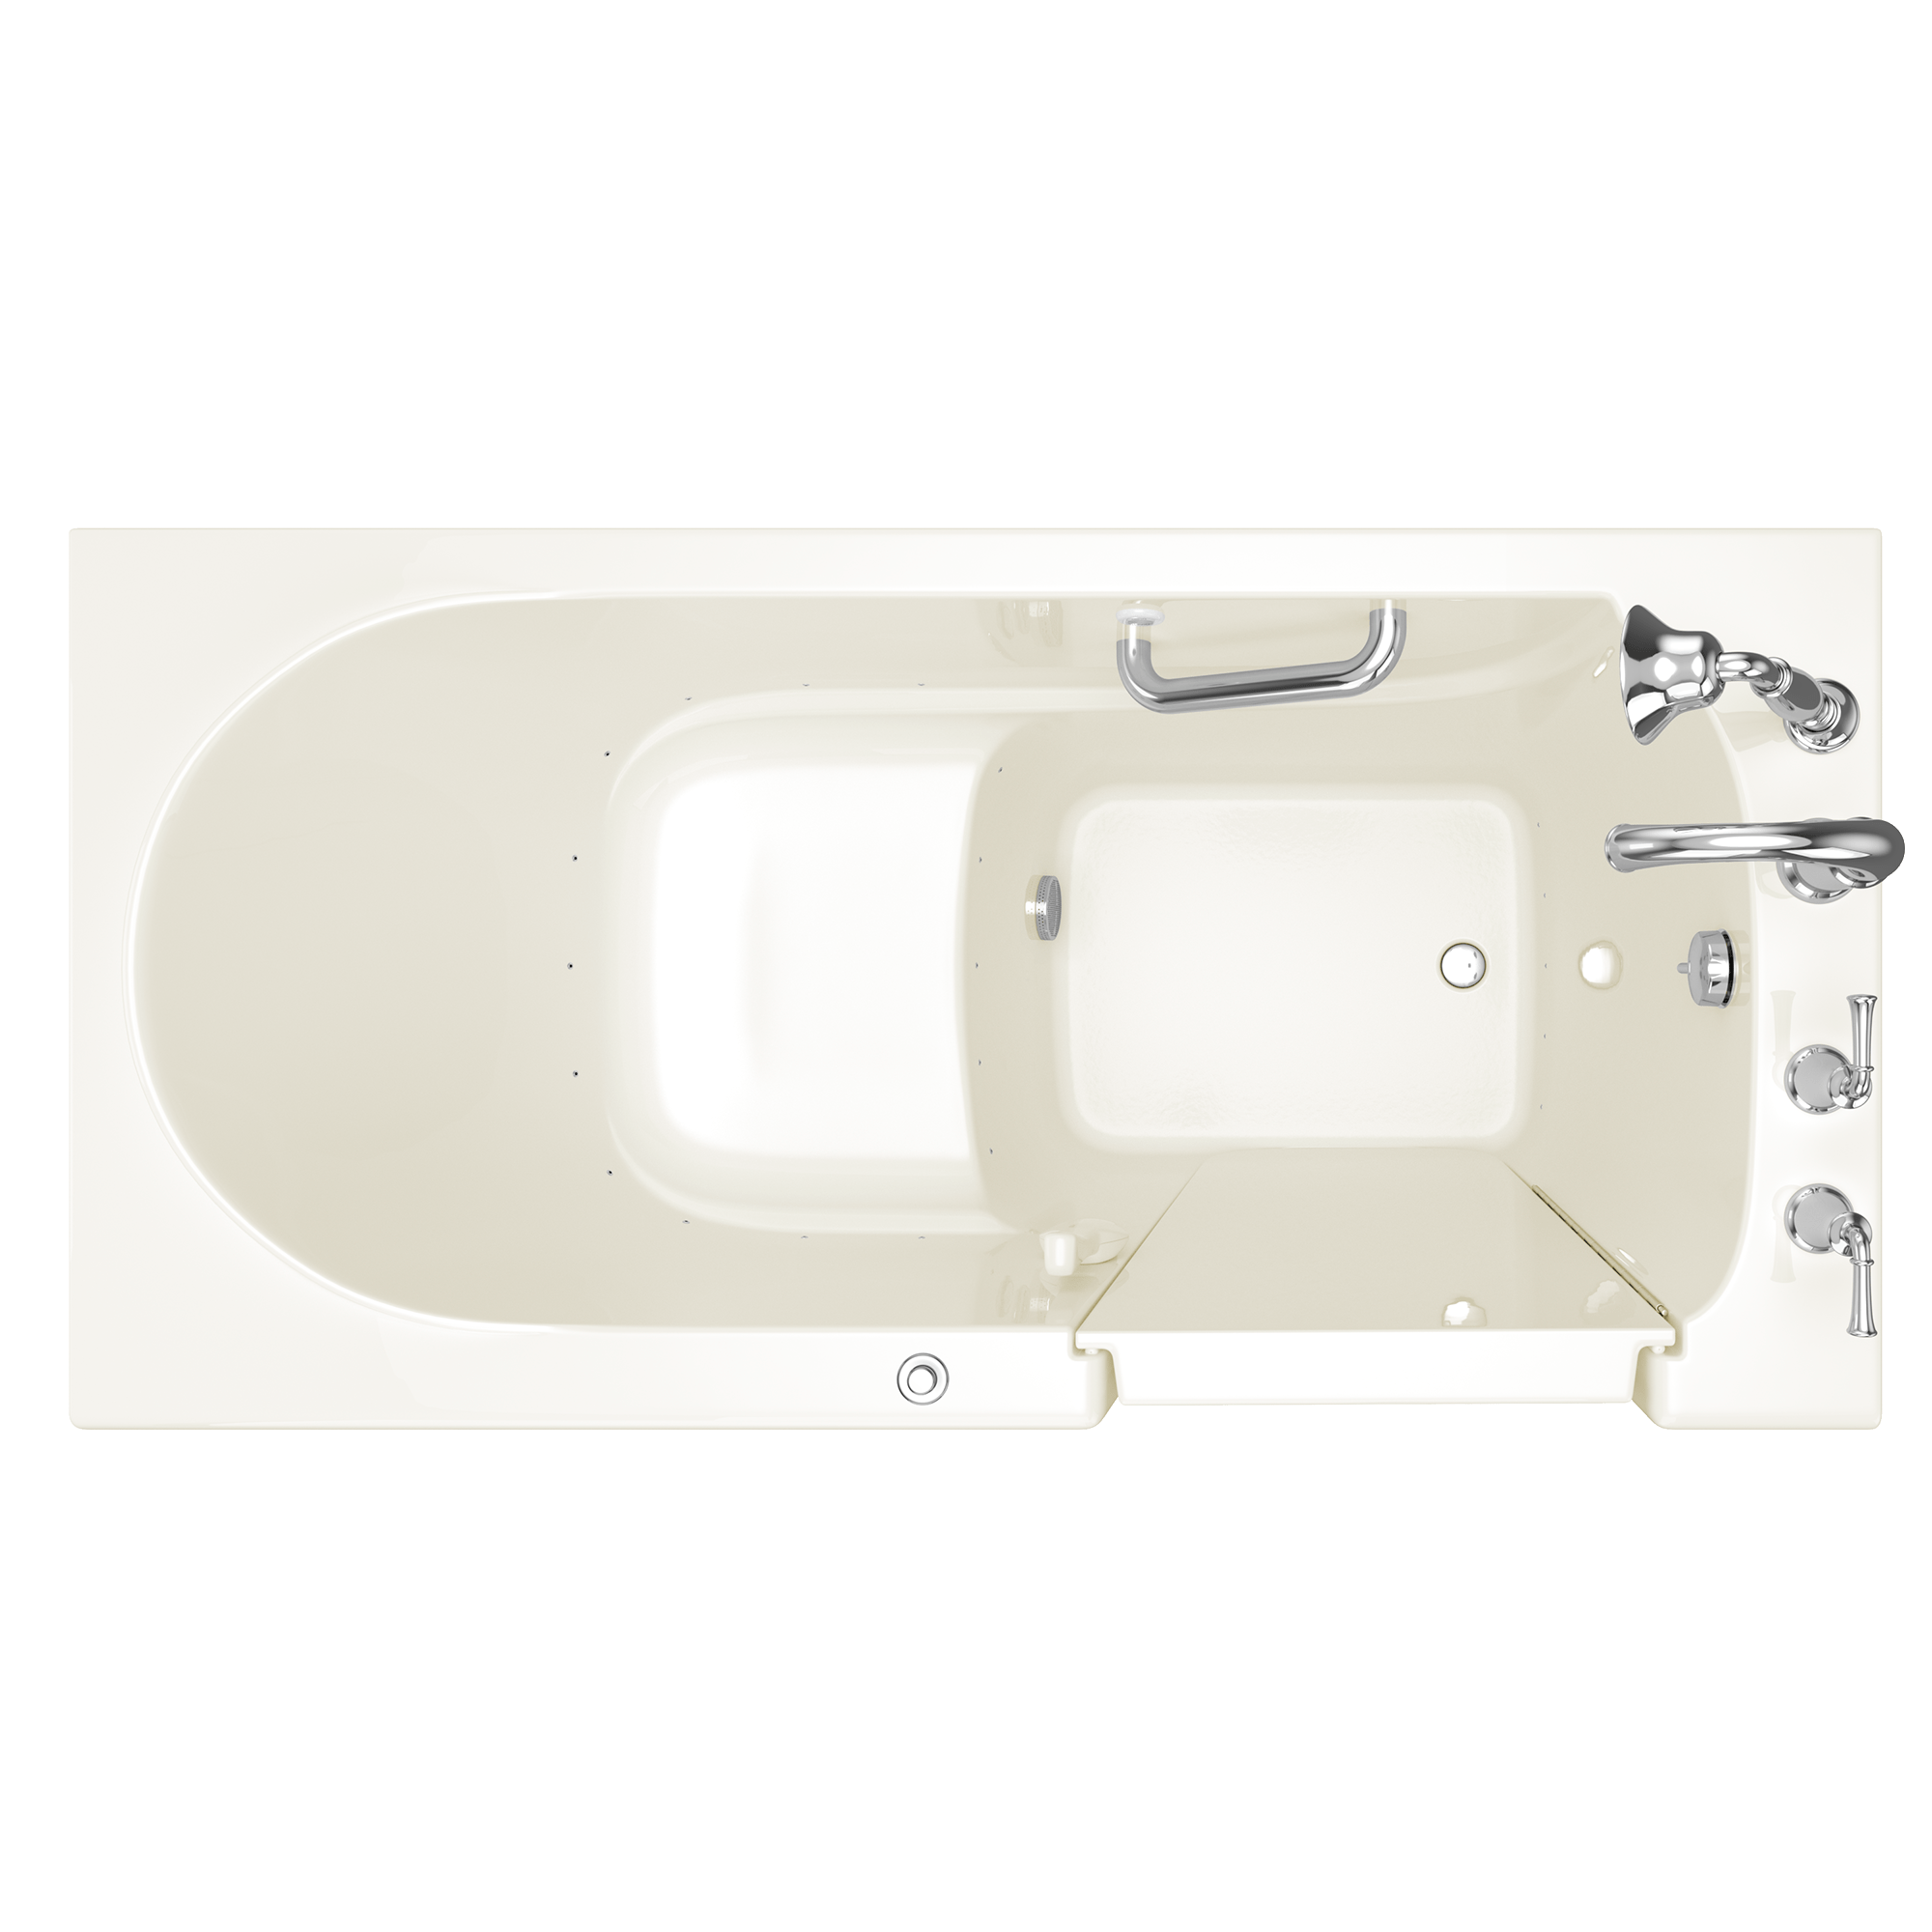 Gelcoat Value Series 30x60 Inch Walk-In Bathtub with Air Spa System - Right Hand Door and Drain